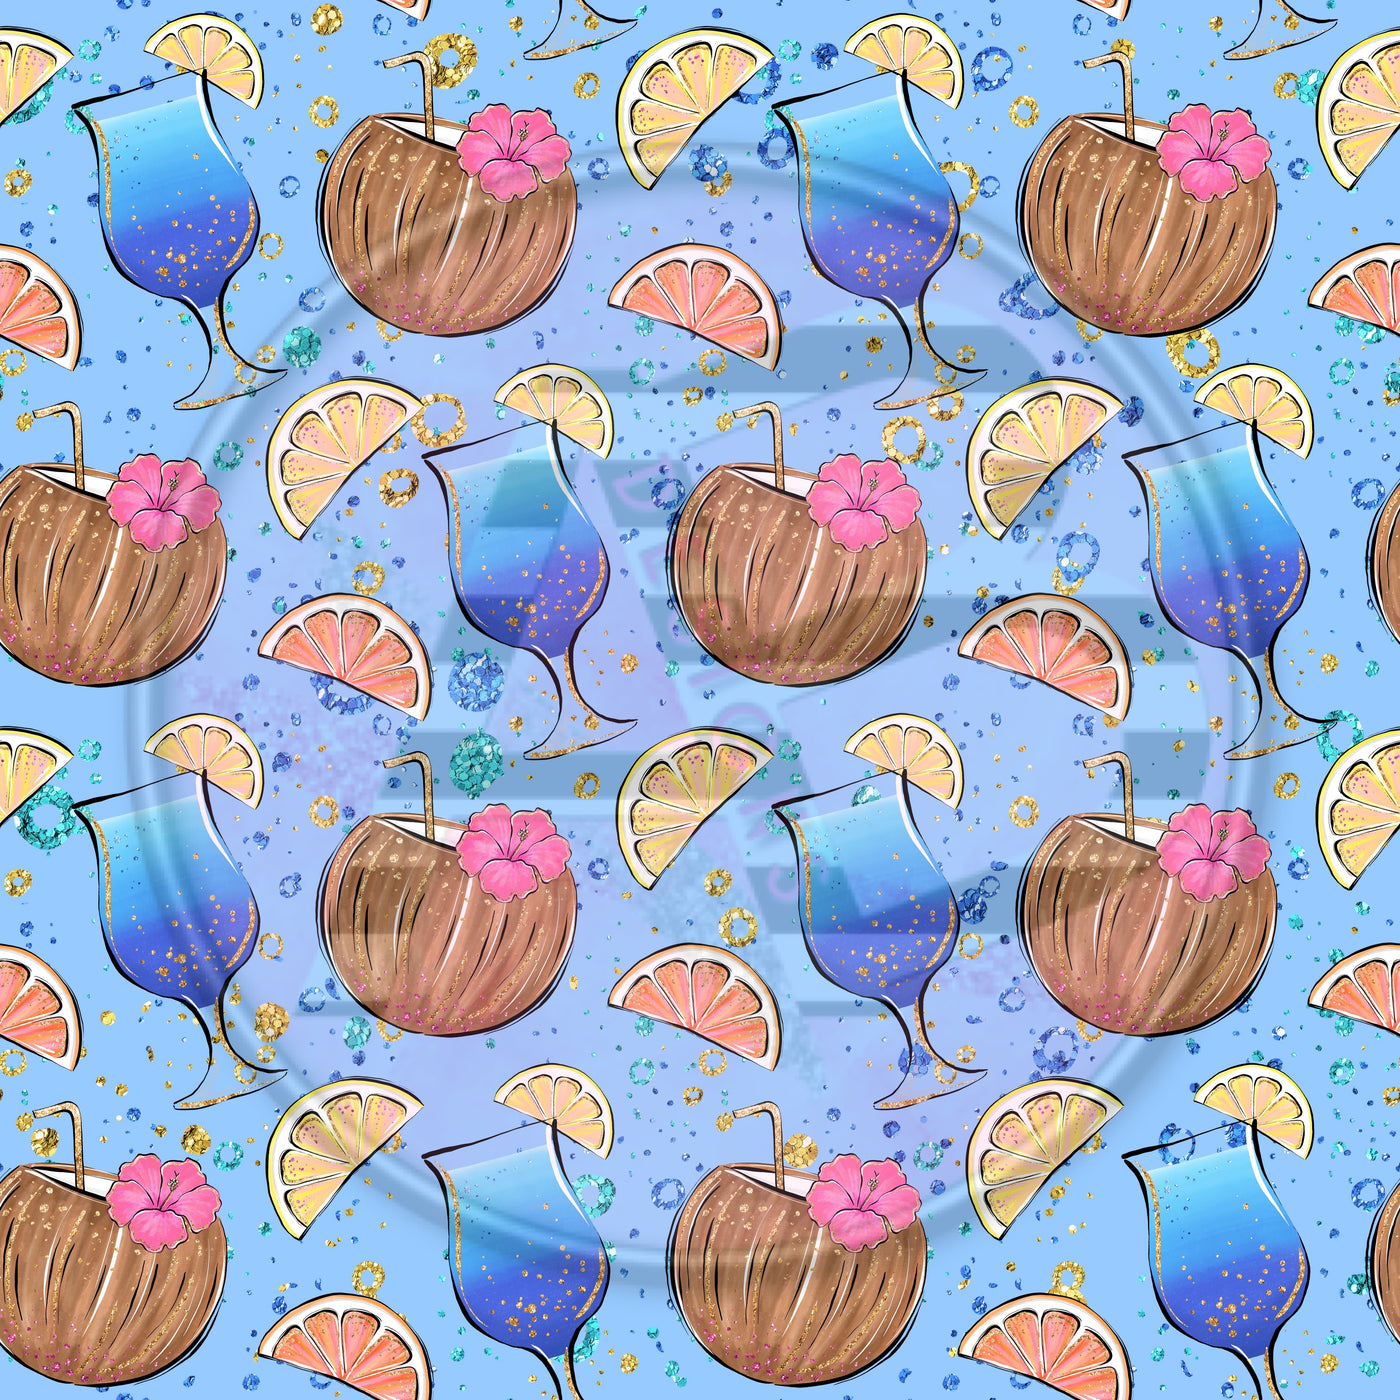 Adhesive Patterned Vinyl - Tropical 1289